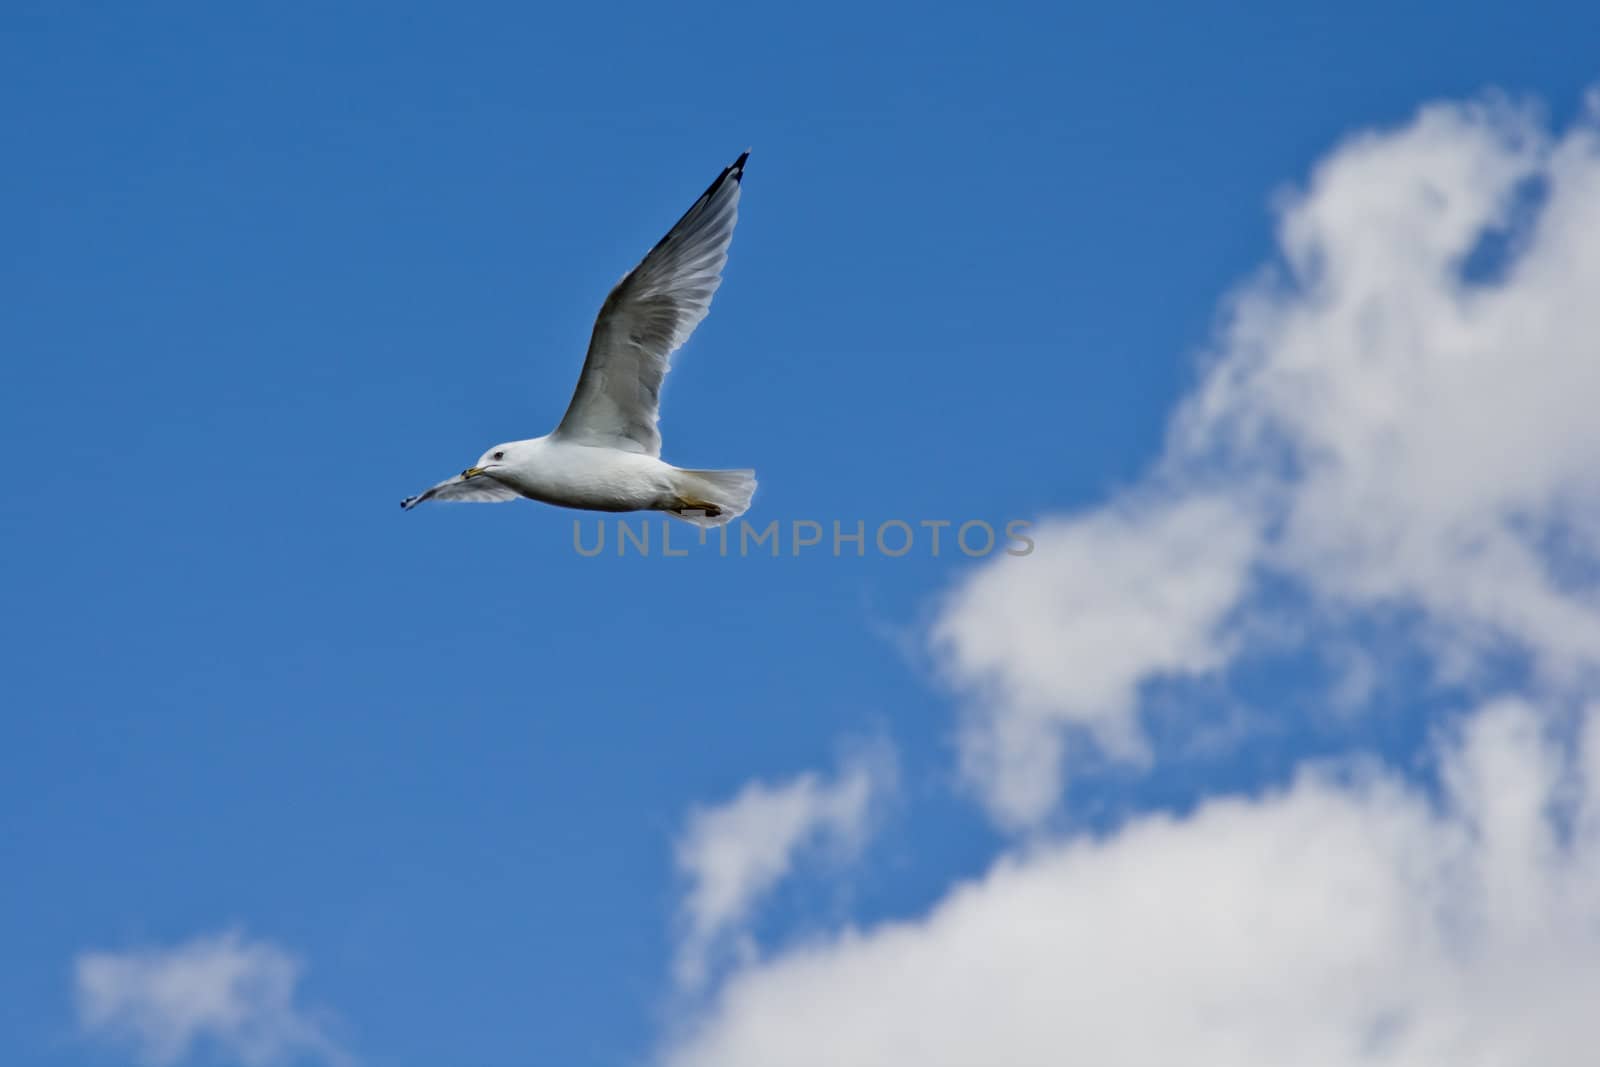 A white seagull flying up in the air on a clear sunny day with clouds in the background